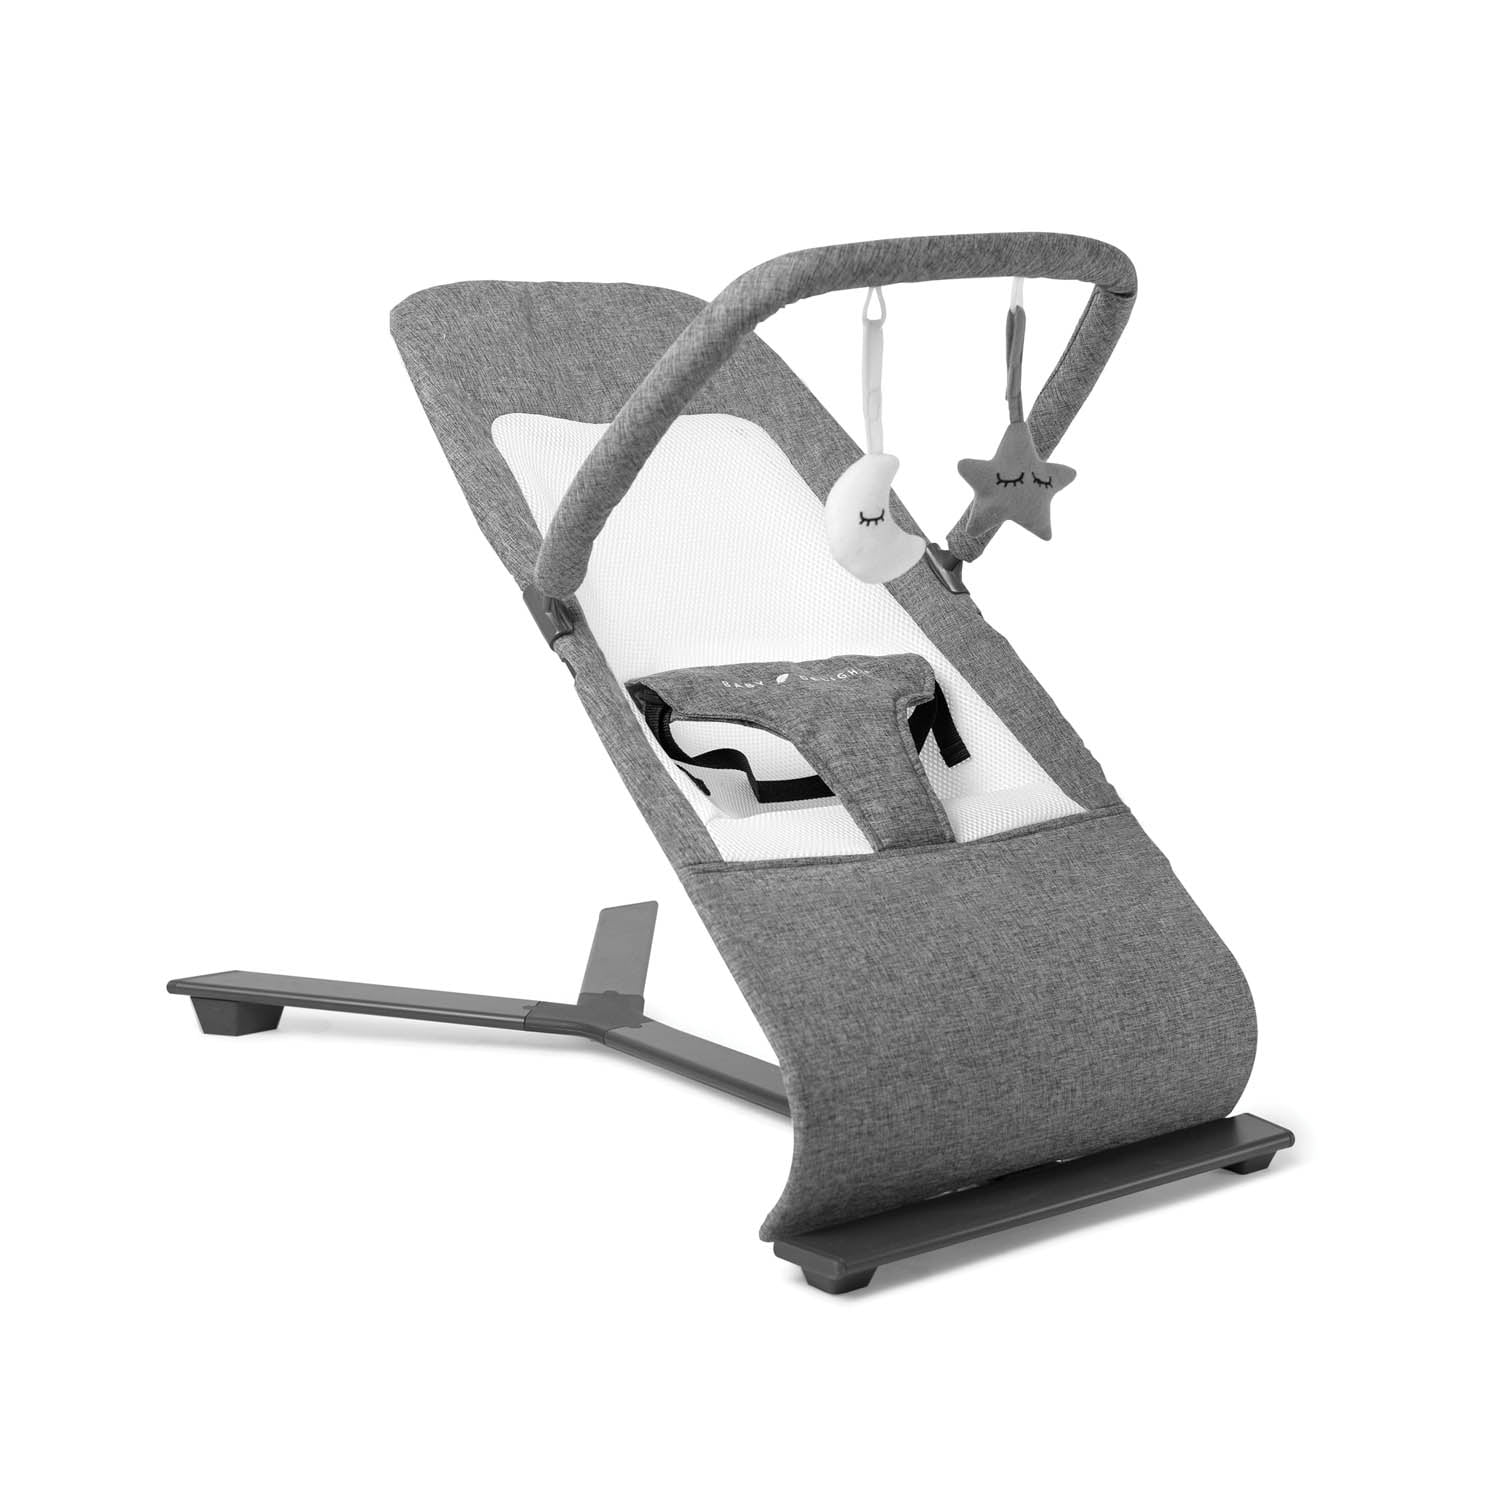 Baby Delight Go With Me Alpine - Deluxe Portable Bouncer in Charcoal Tweed  - For Use 0-6 Months or up to 20lbs